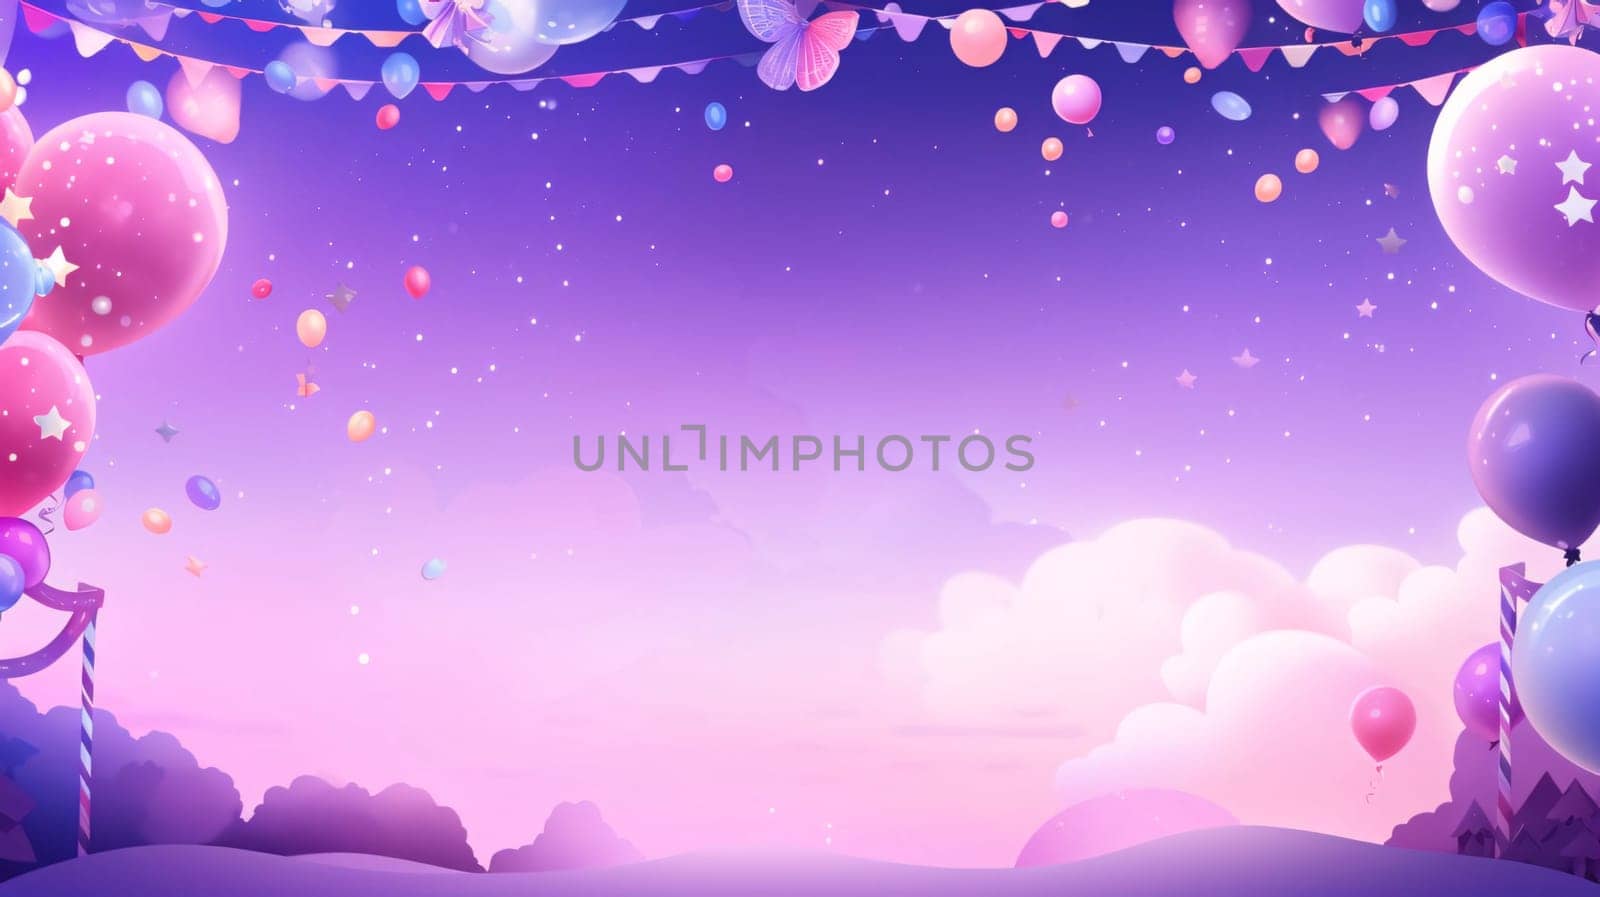 Banner: Purple sky background with balloons and confetti. Vector illustration.